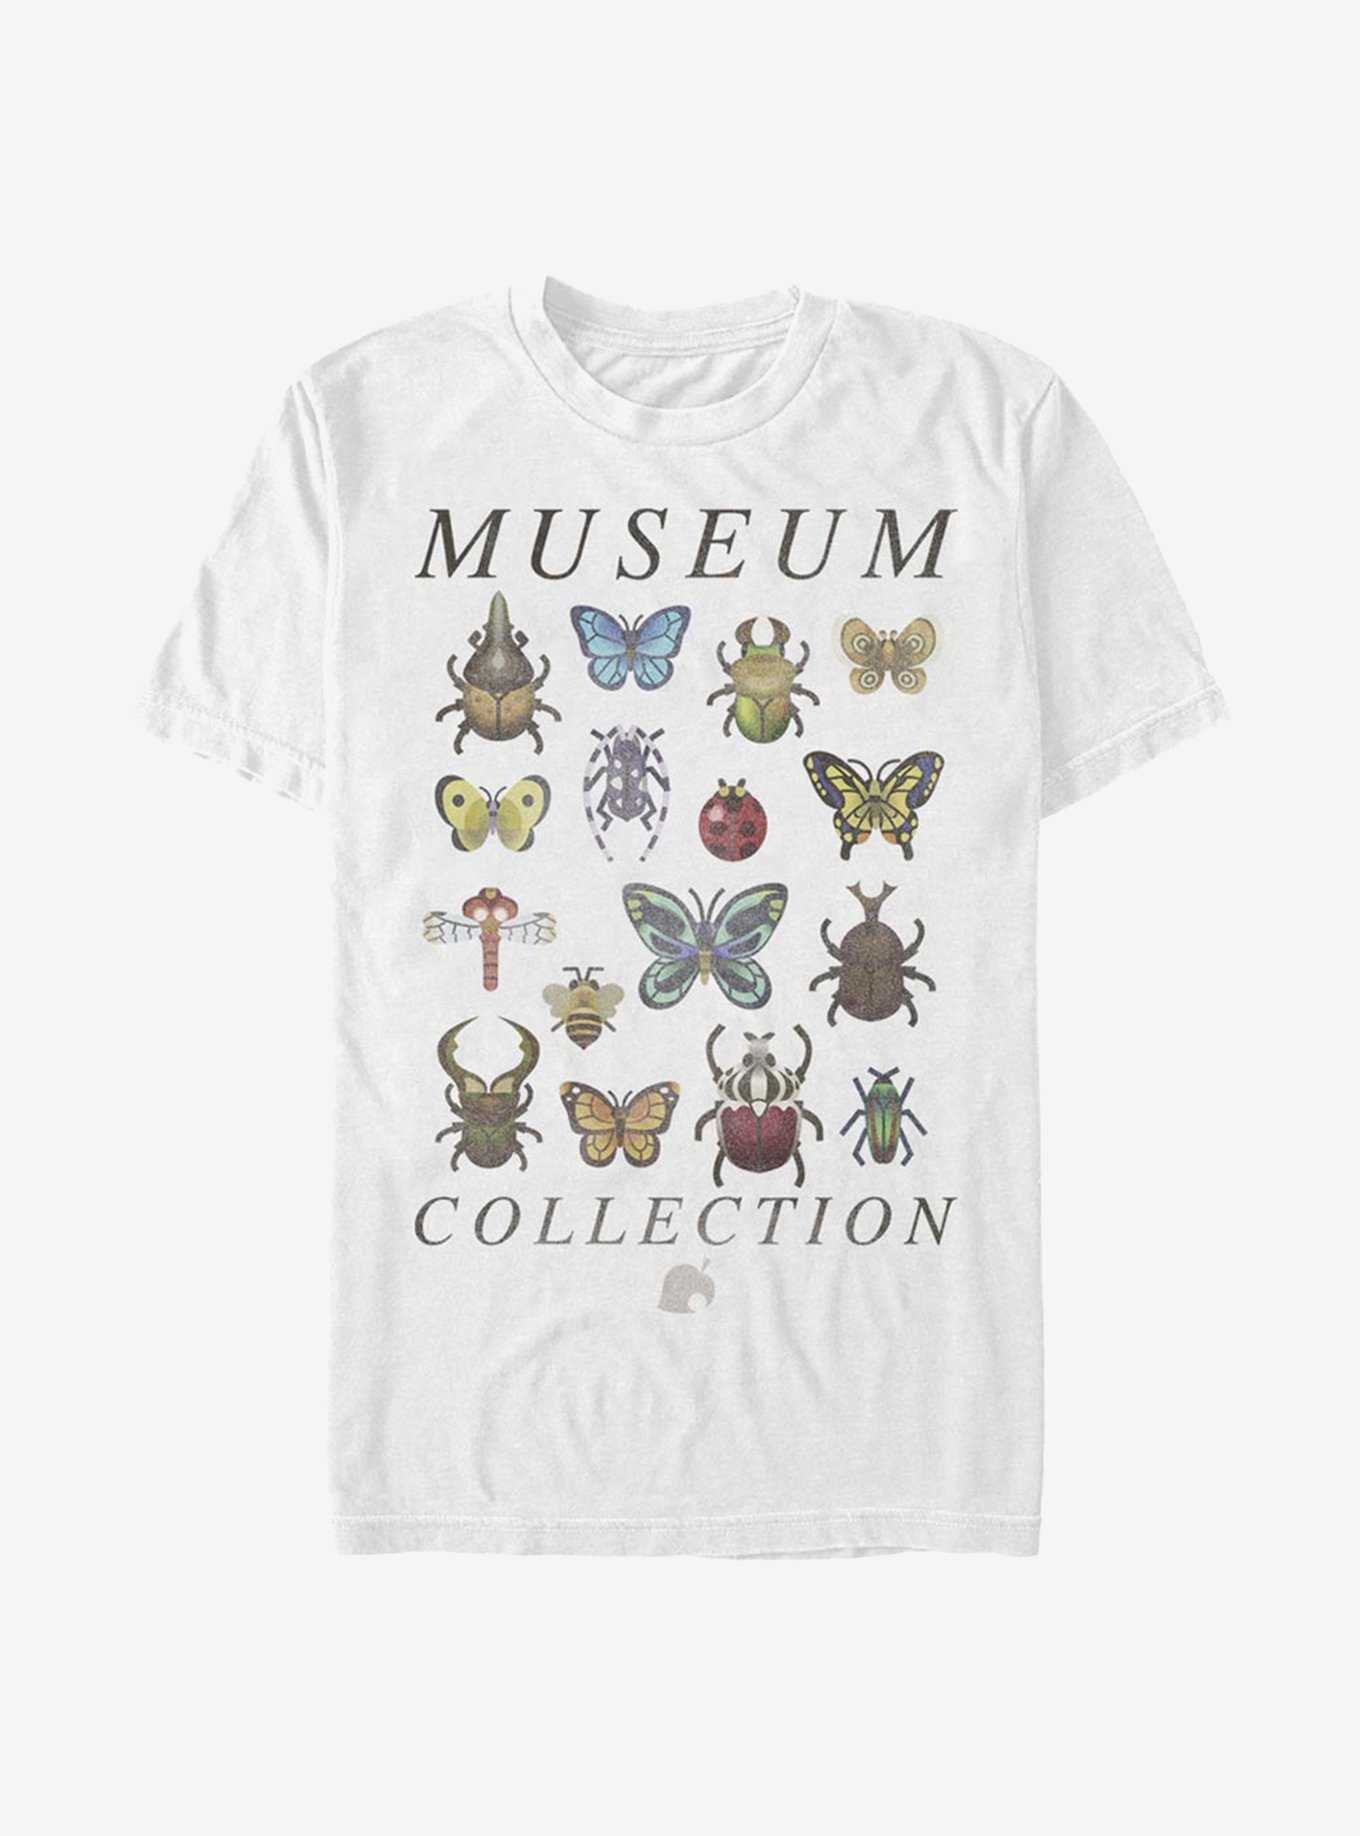 Animal Crossing Bug Collection T-Shirt, WHITE, hi-res